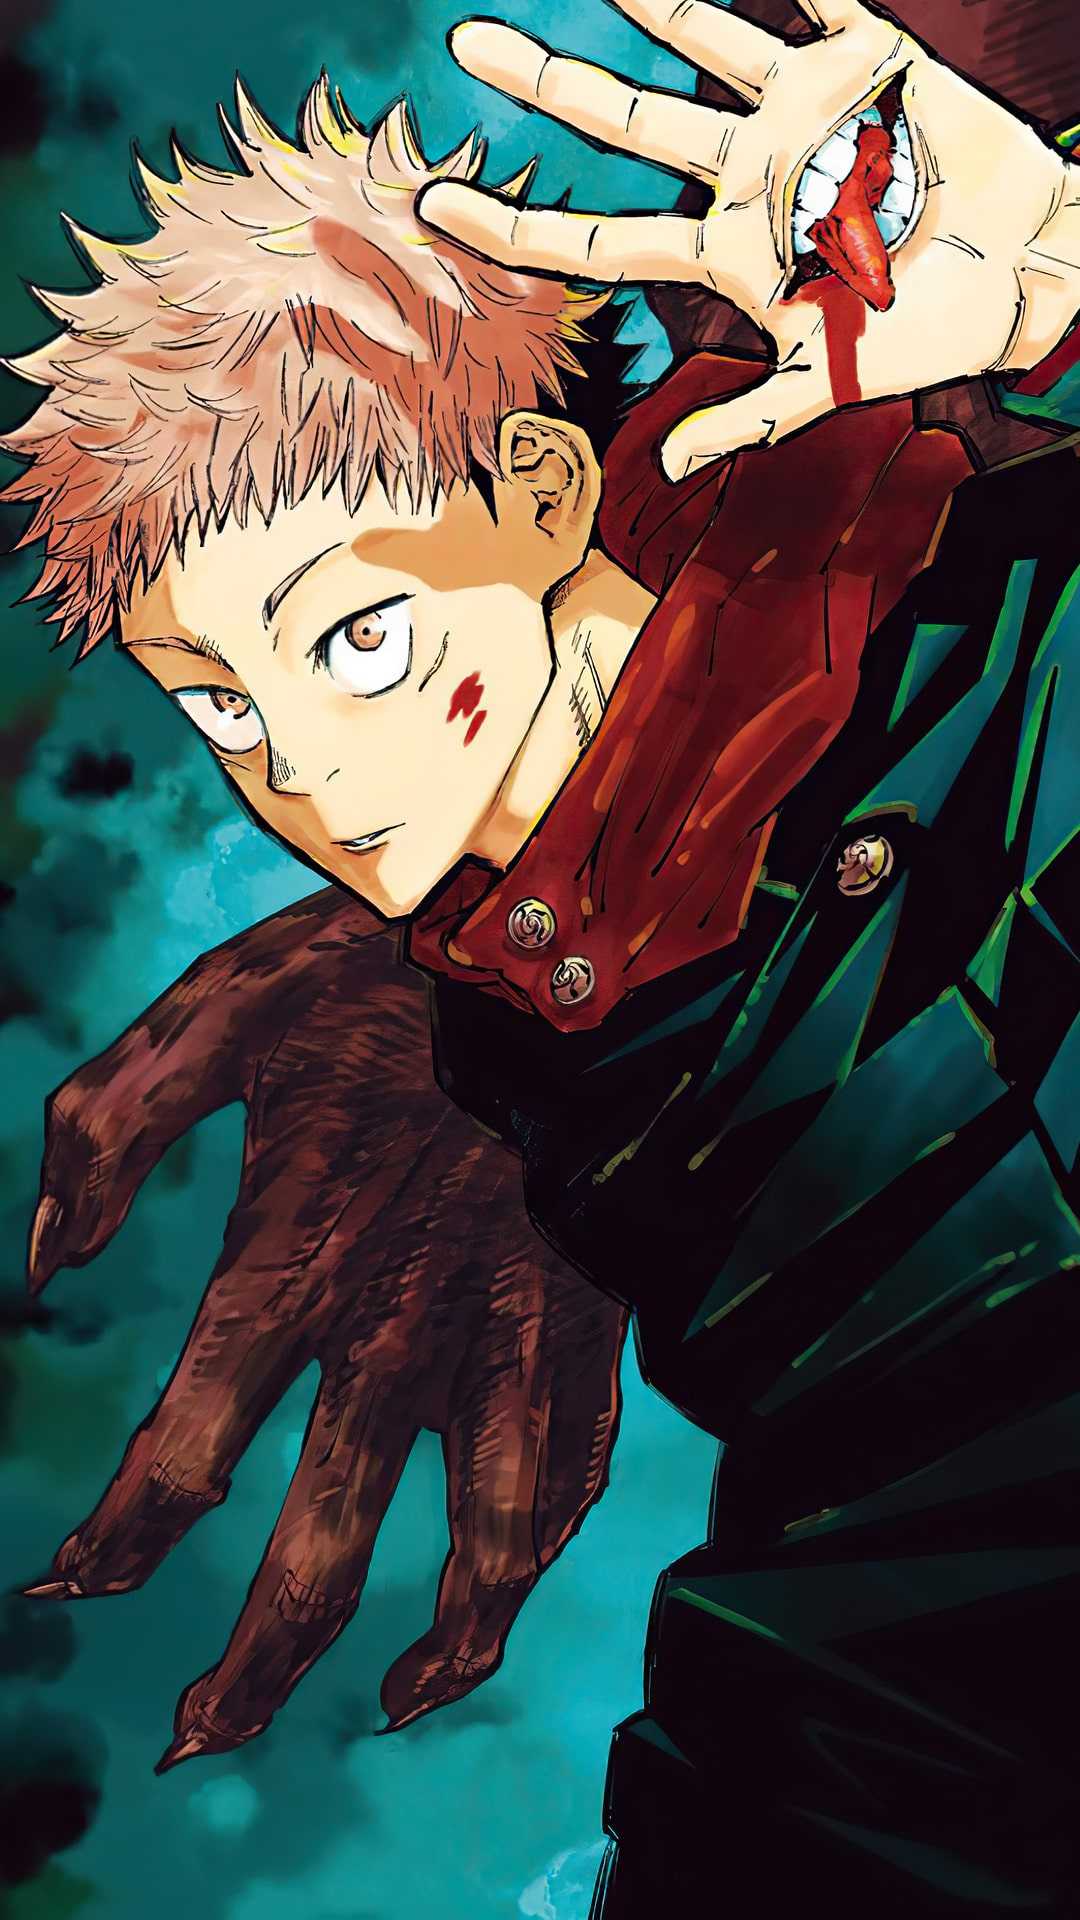 Jujutsu Kaisen Wallpaper Red / 1280x2120 Satoru Gojo Cool Jujutsu Kaisen iPhone 6 Plus Wallpaper HD Anime 4k Wallpaper Image Photo And Background / You can also upload and share your favorite